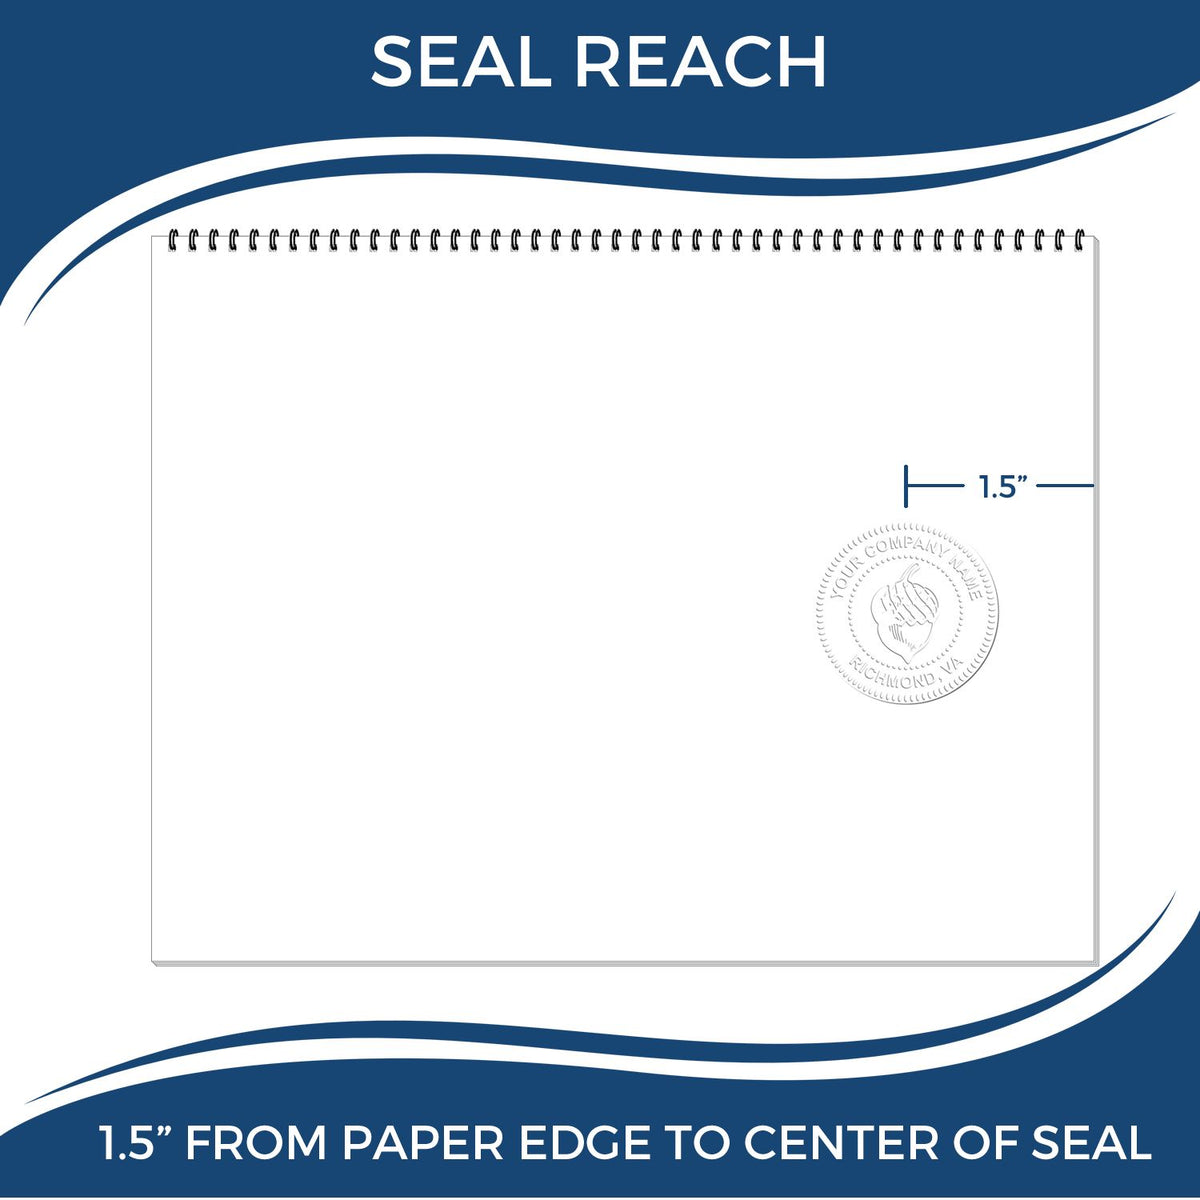 An infographic showing the seal reach which is represented by a ruler and a miniature seal image of the Gift Virginia Geologist Seal